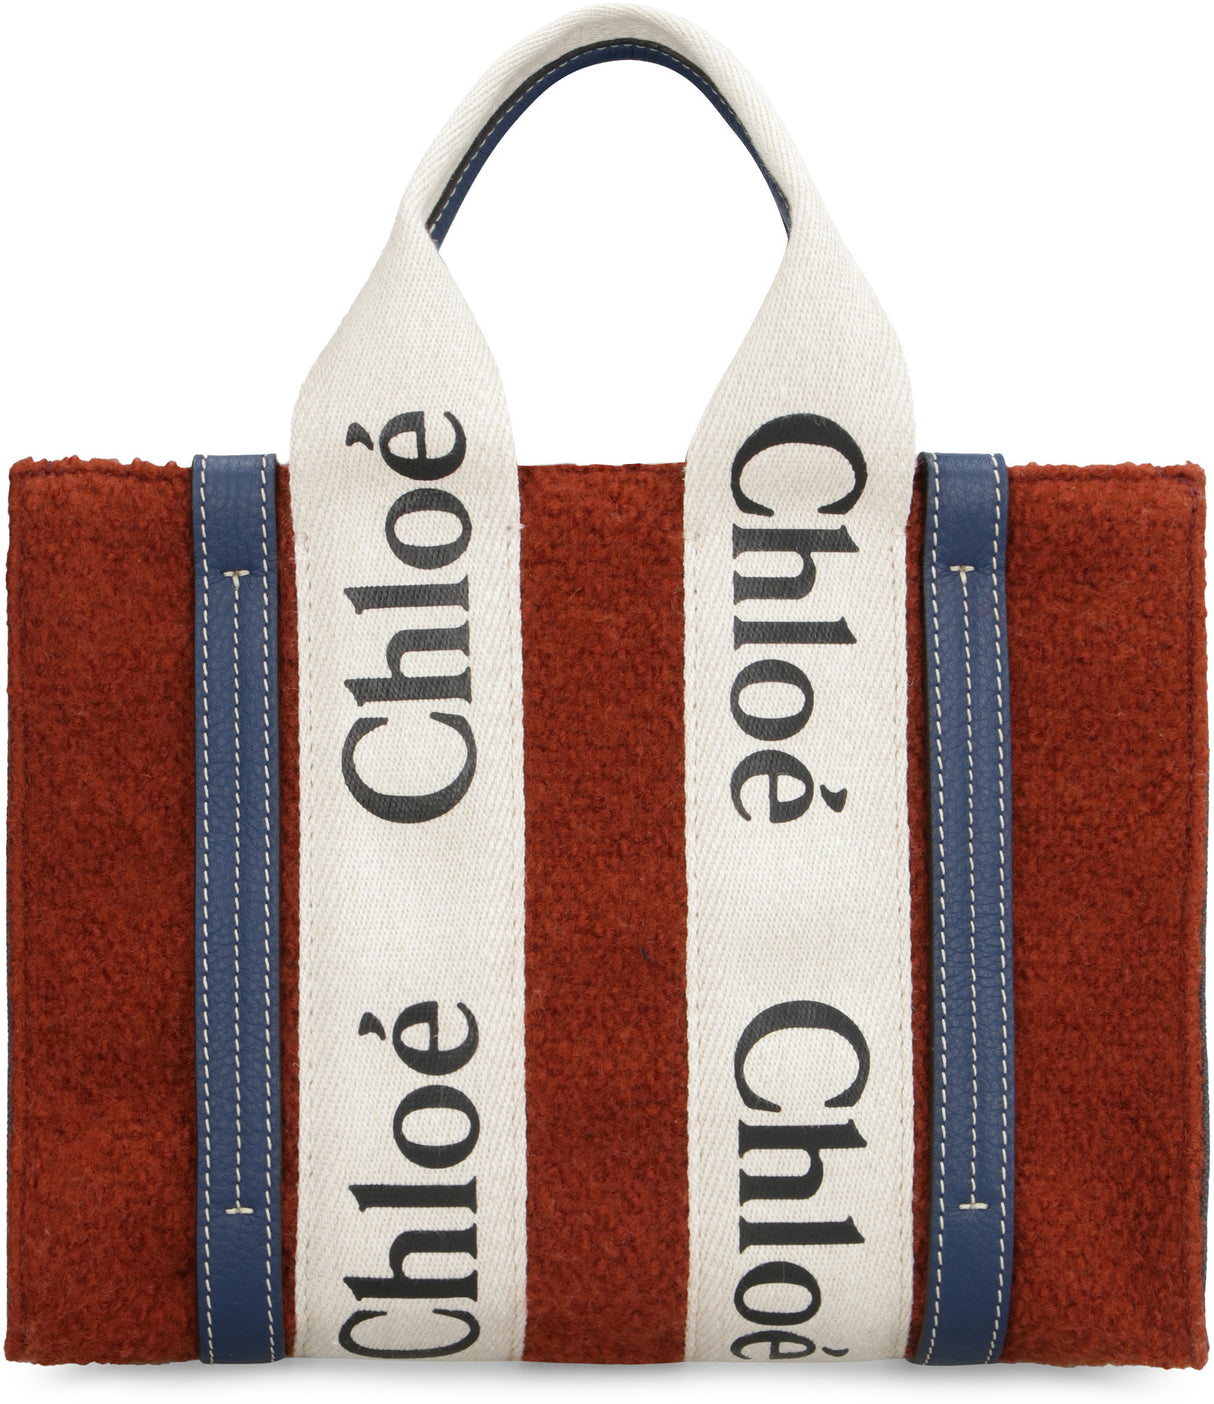 CHLOÉ Chic Mini Wool Tote with Leather Accents and Adjustable Strap - Red